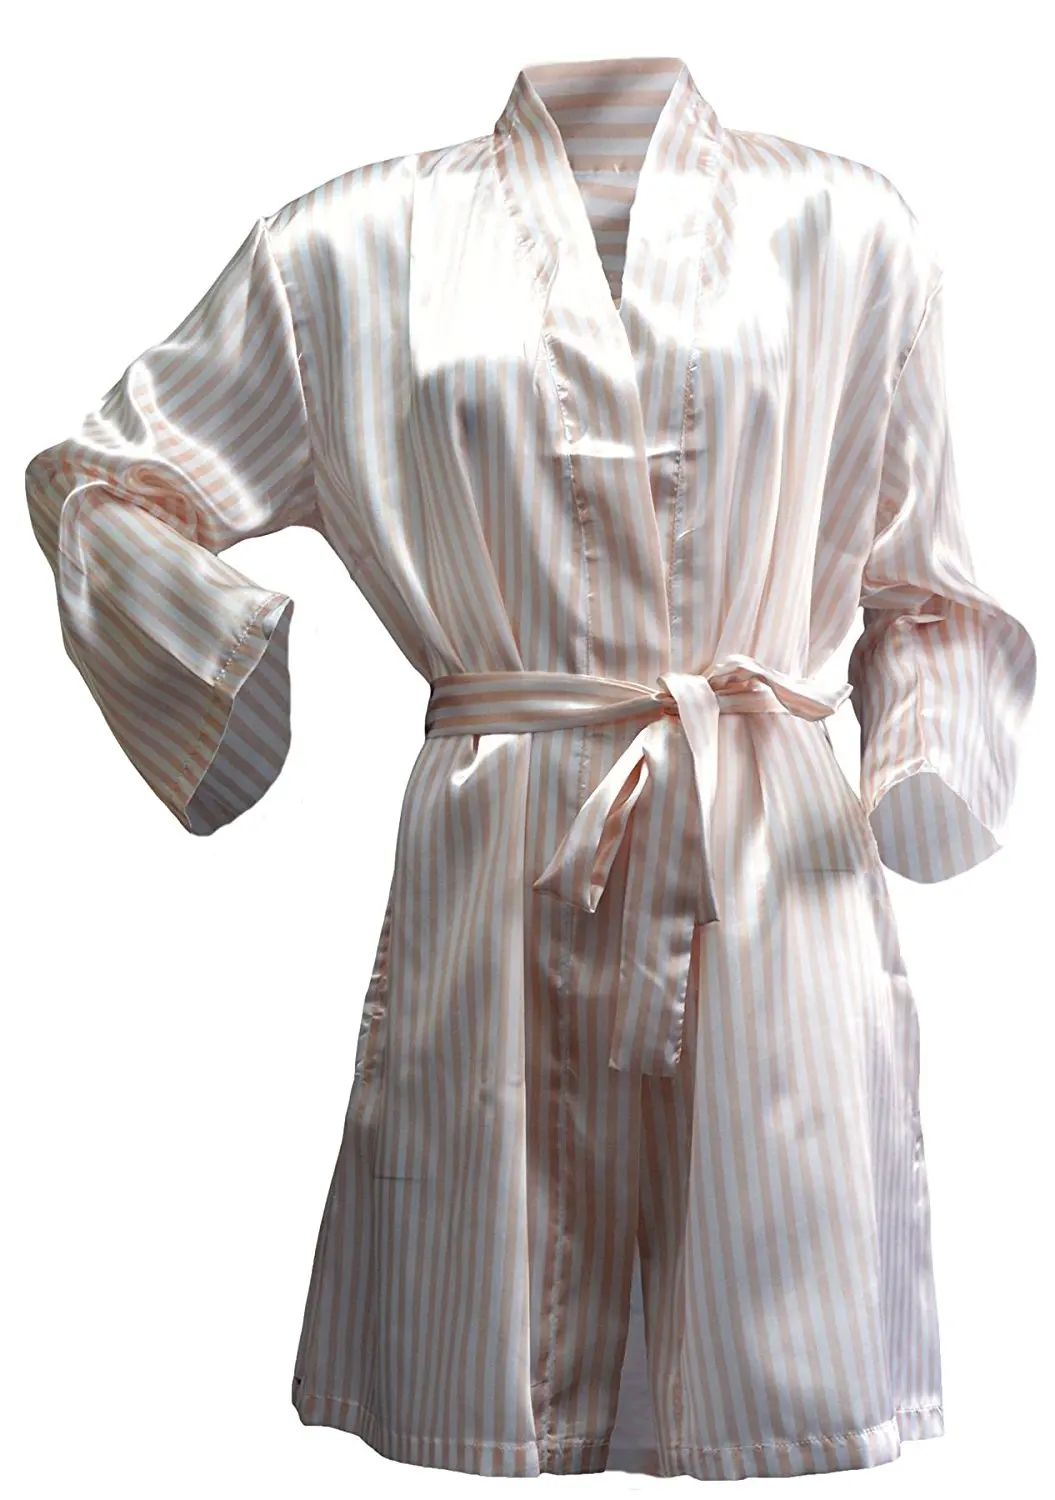 Octave Ladies Summer 100/% Cotton Soft Touch Waffle Bath Robe Dressing Gown